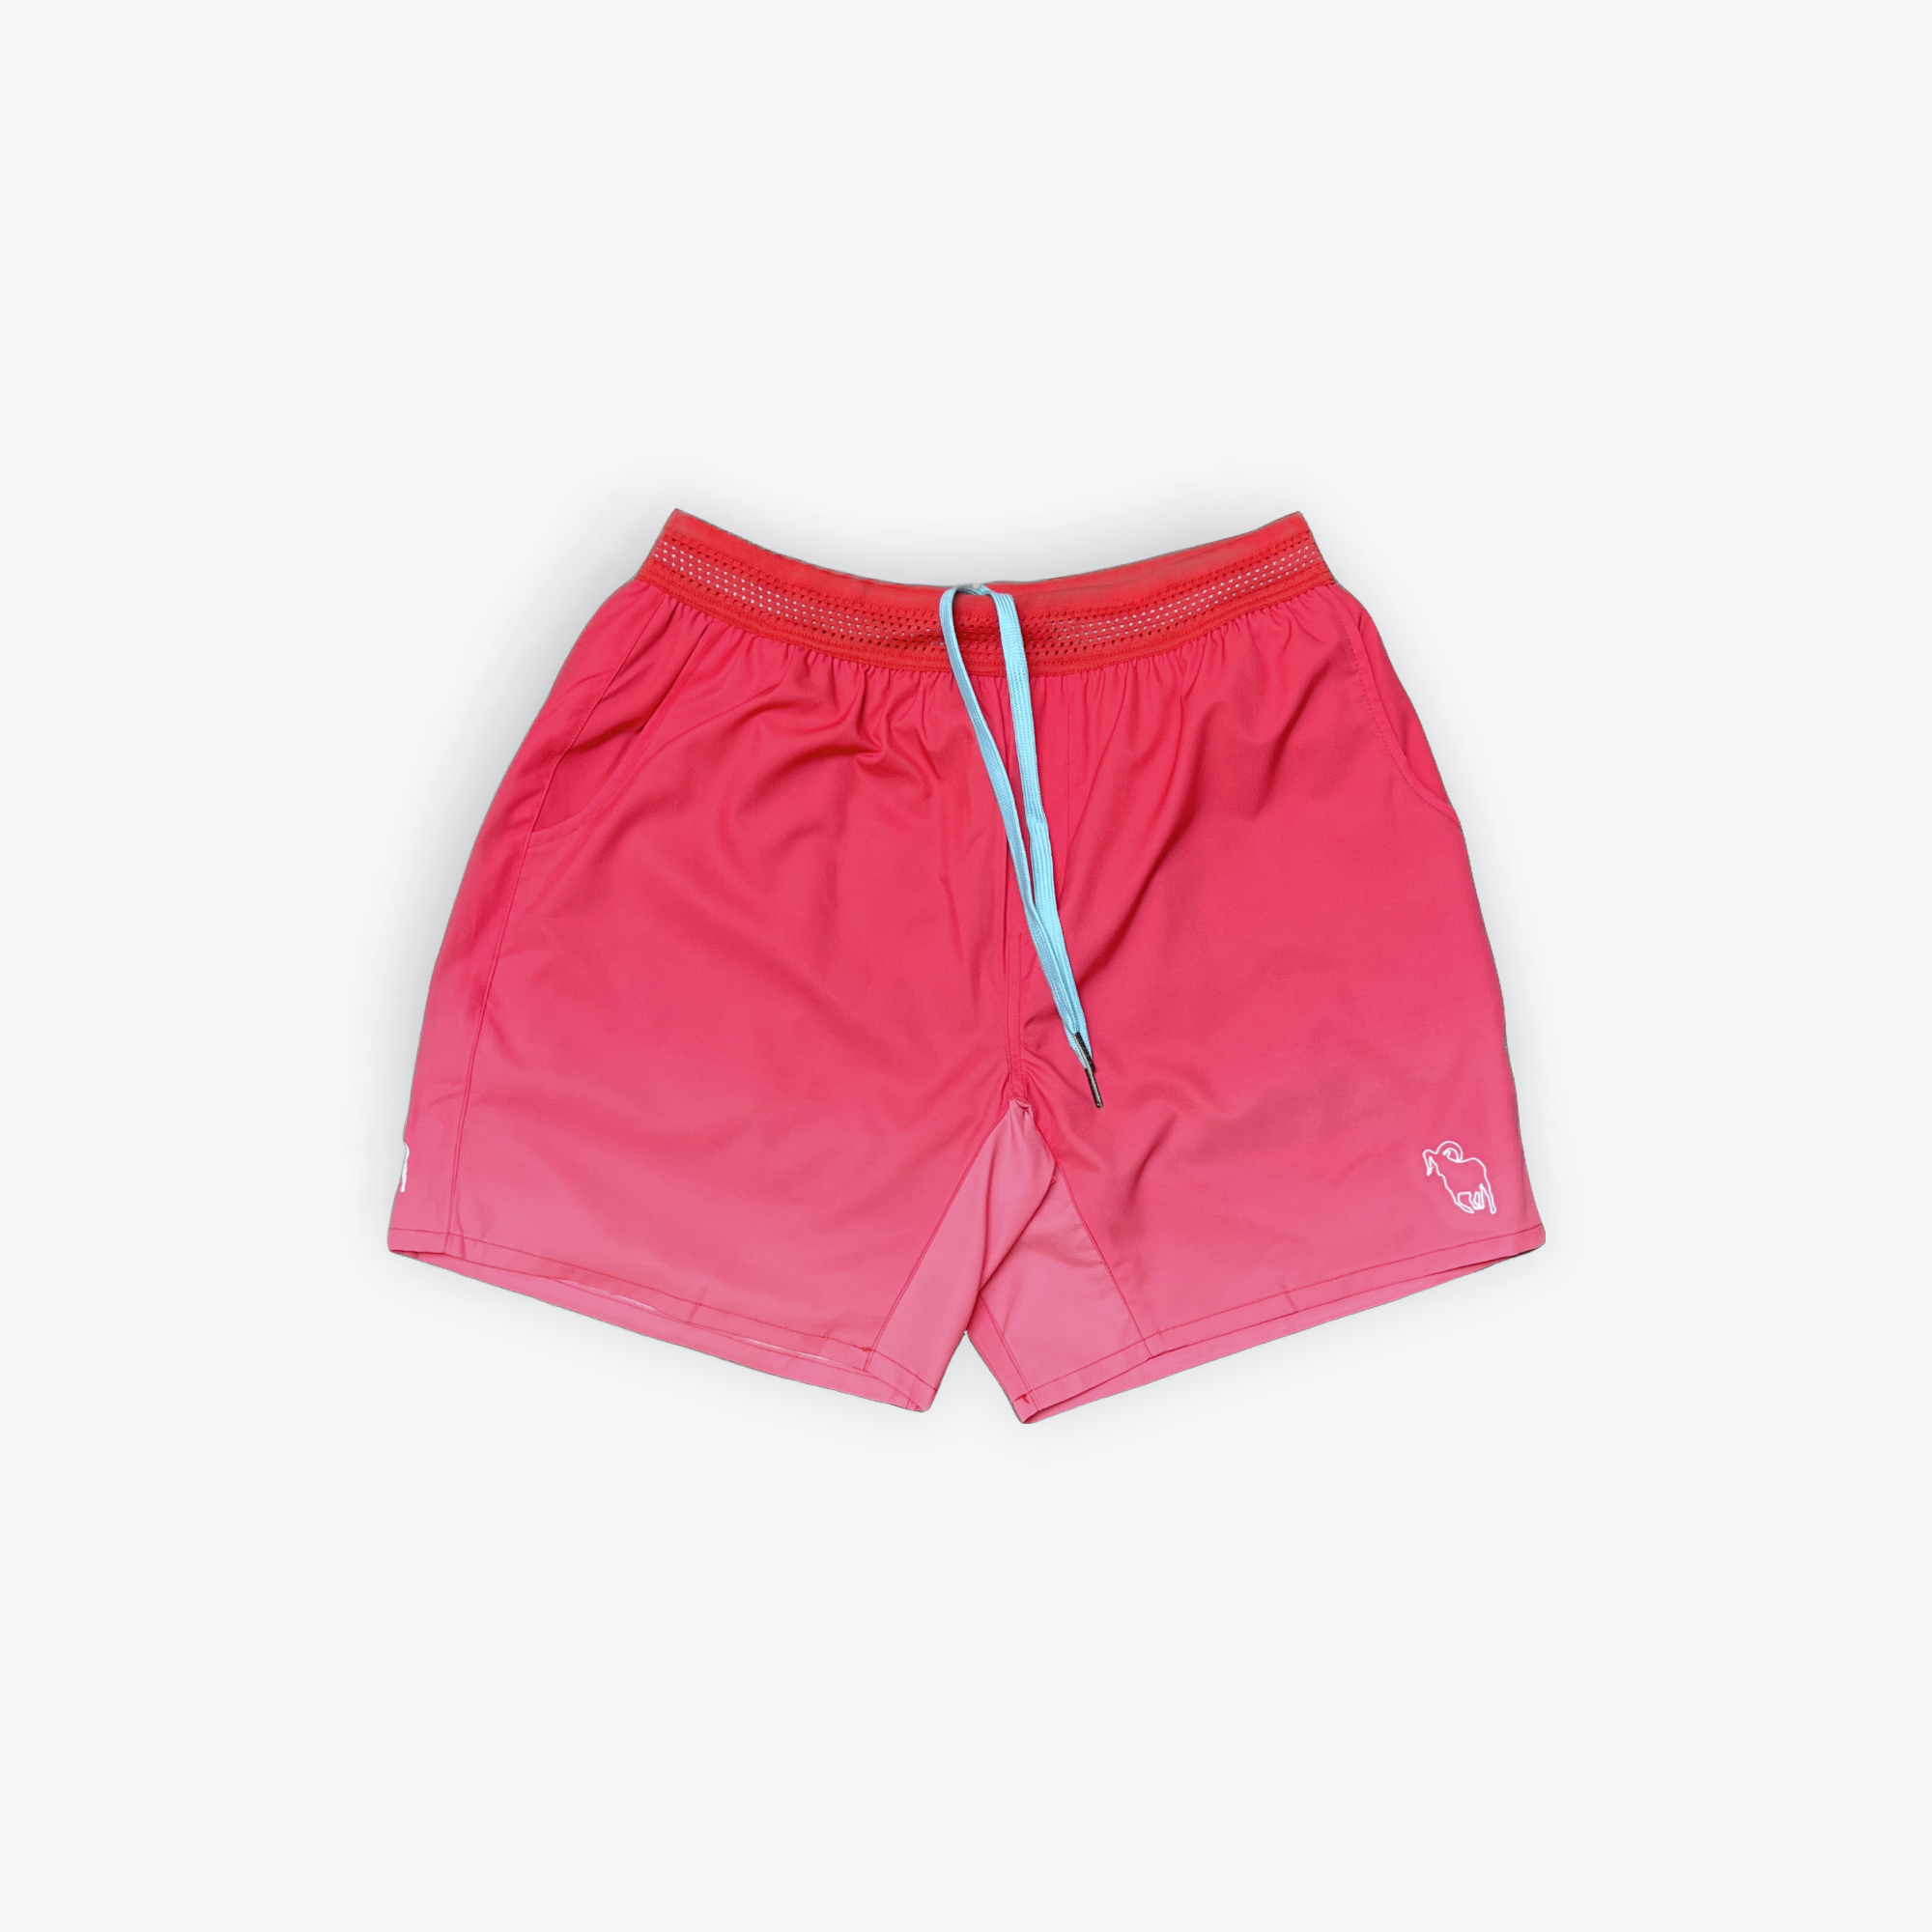 Mens High Point 7 2-in-1 Shorts